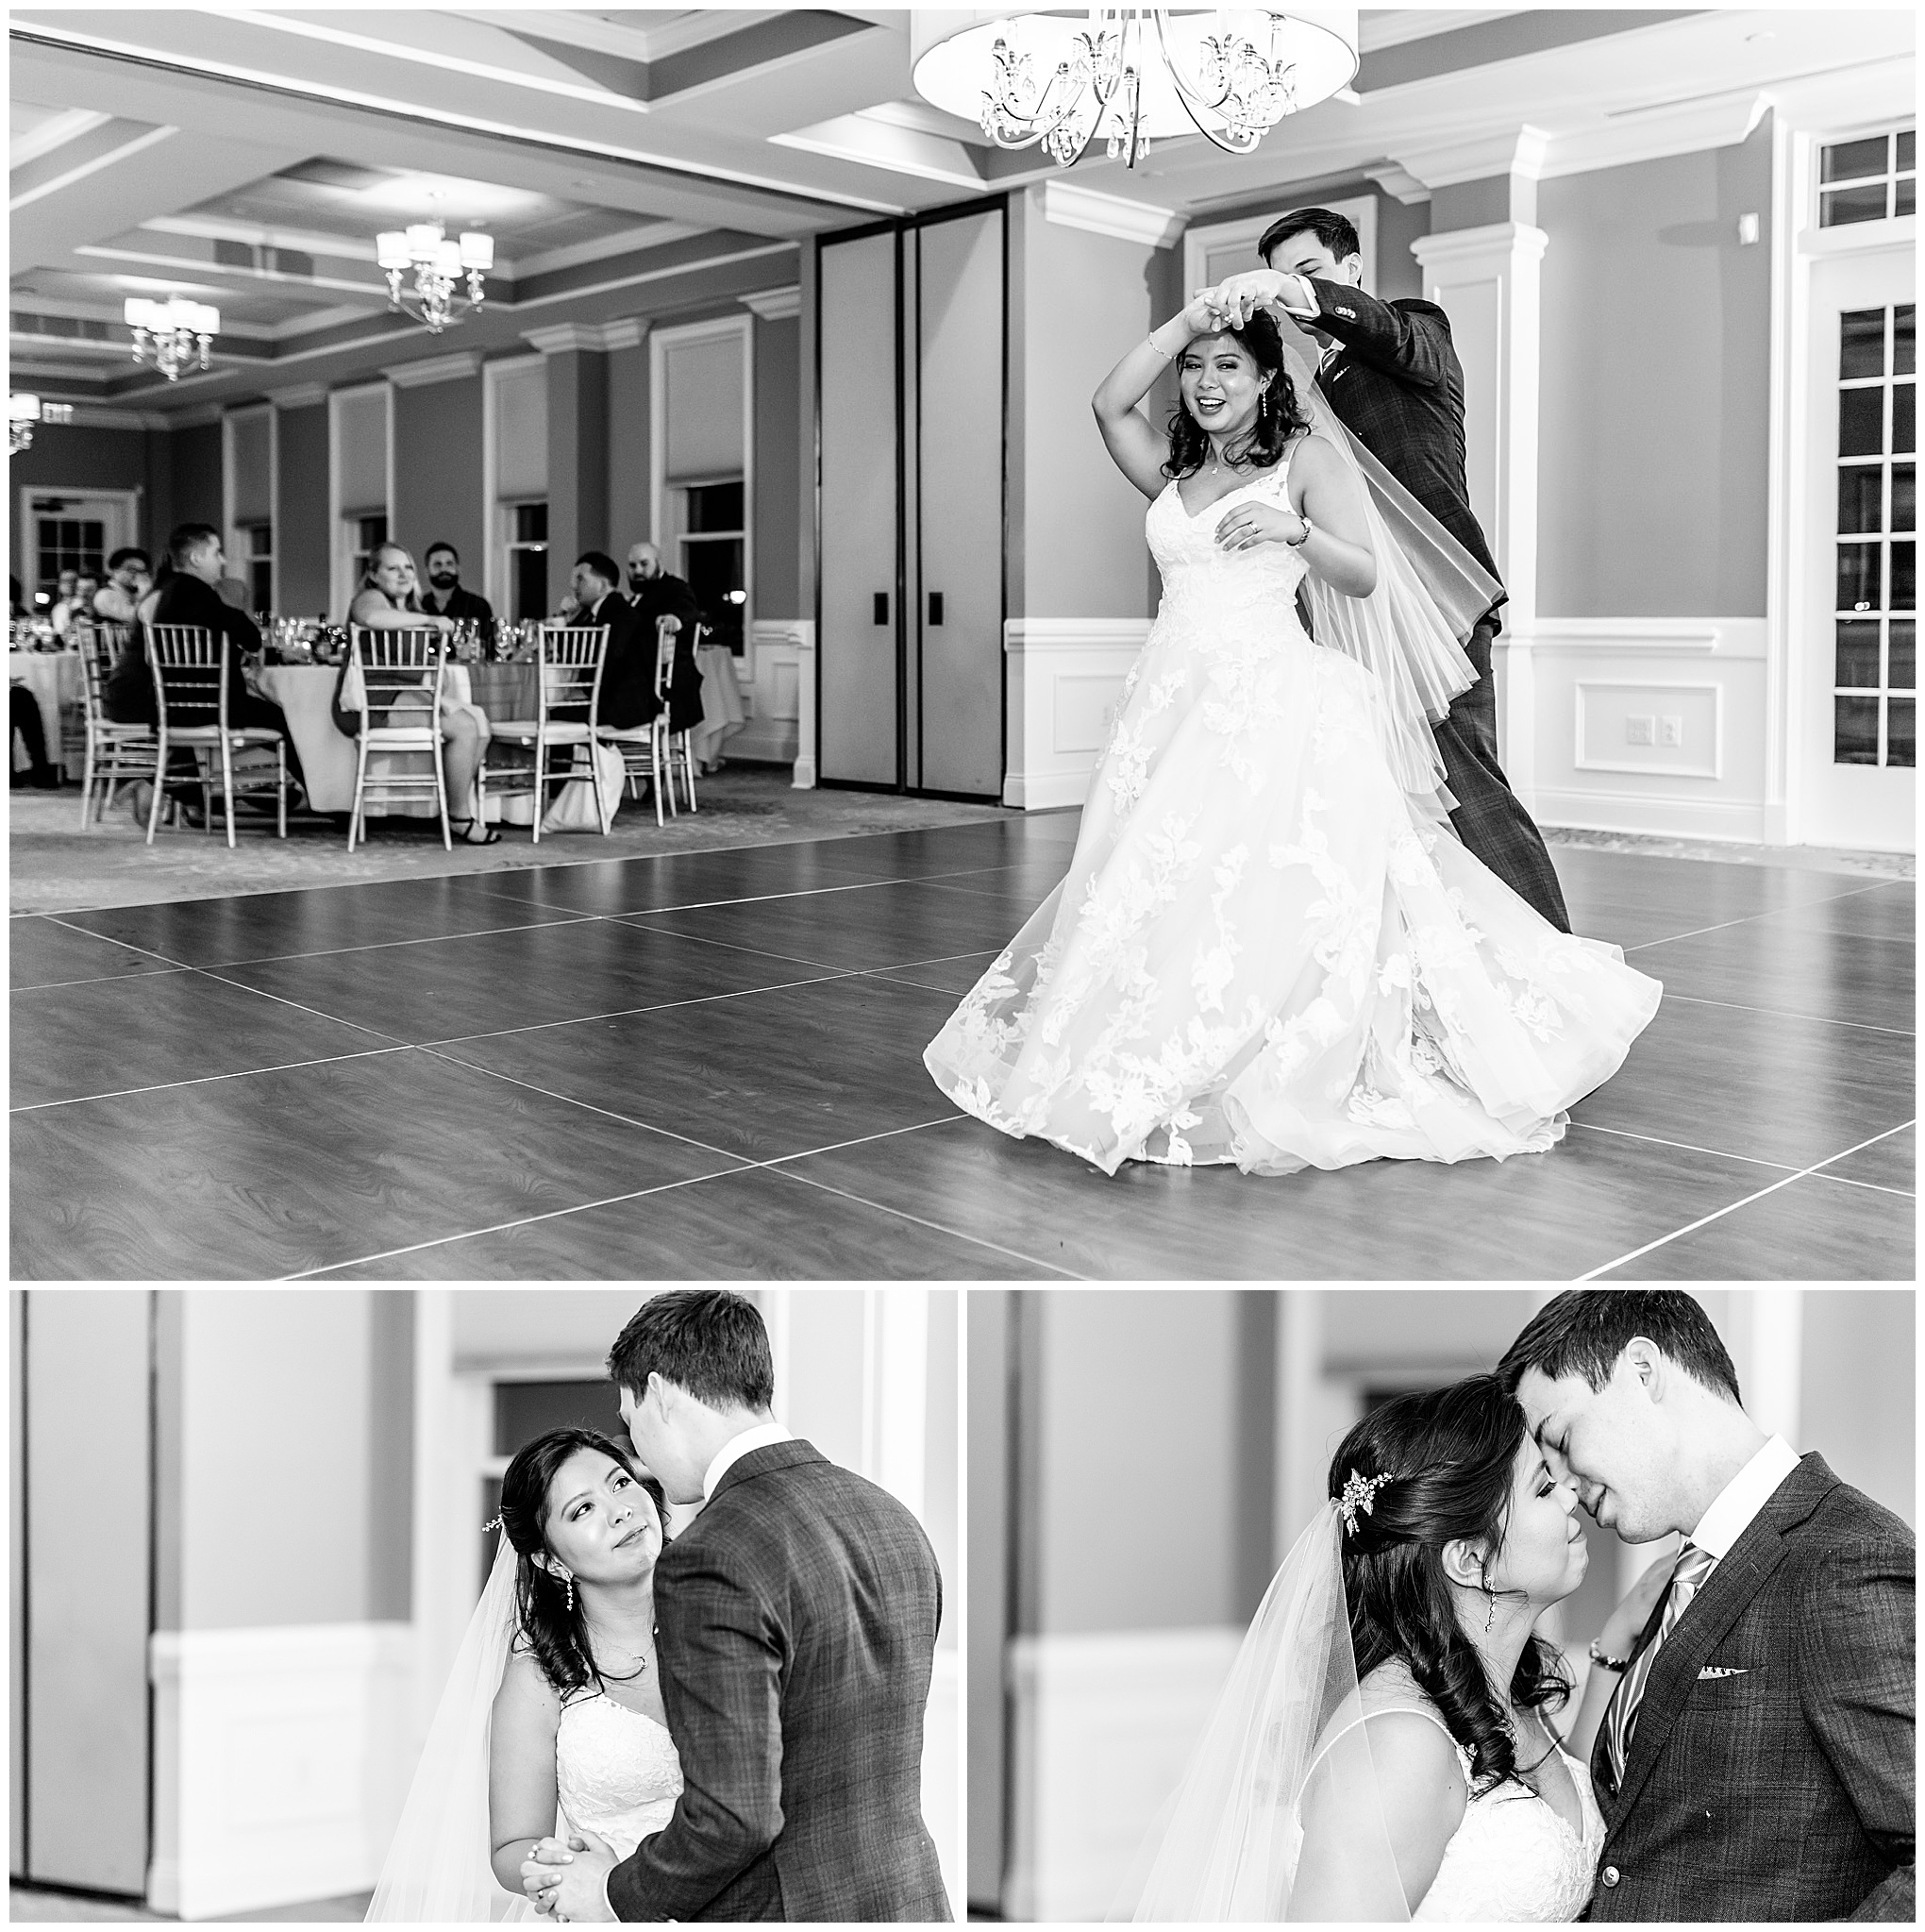 Regency at Dominion Valley wedding, Virginia country club wedding, Haymarket Virginia wedding, northern Virginia wedding, winter wedding, winter wedding aesthetic, DC micro wedding, northern Virginia wedding venues, classic winter wedding, Rachel E.H. Photography, bride and groom doing first dance, bride and groom kissing on dance floor